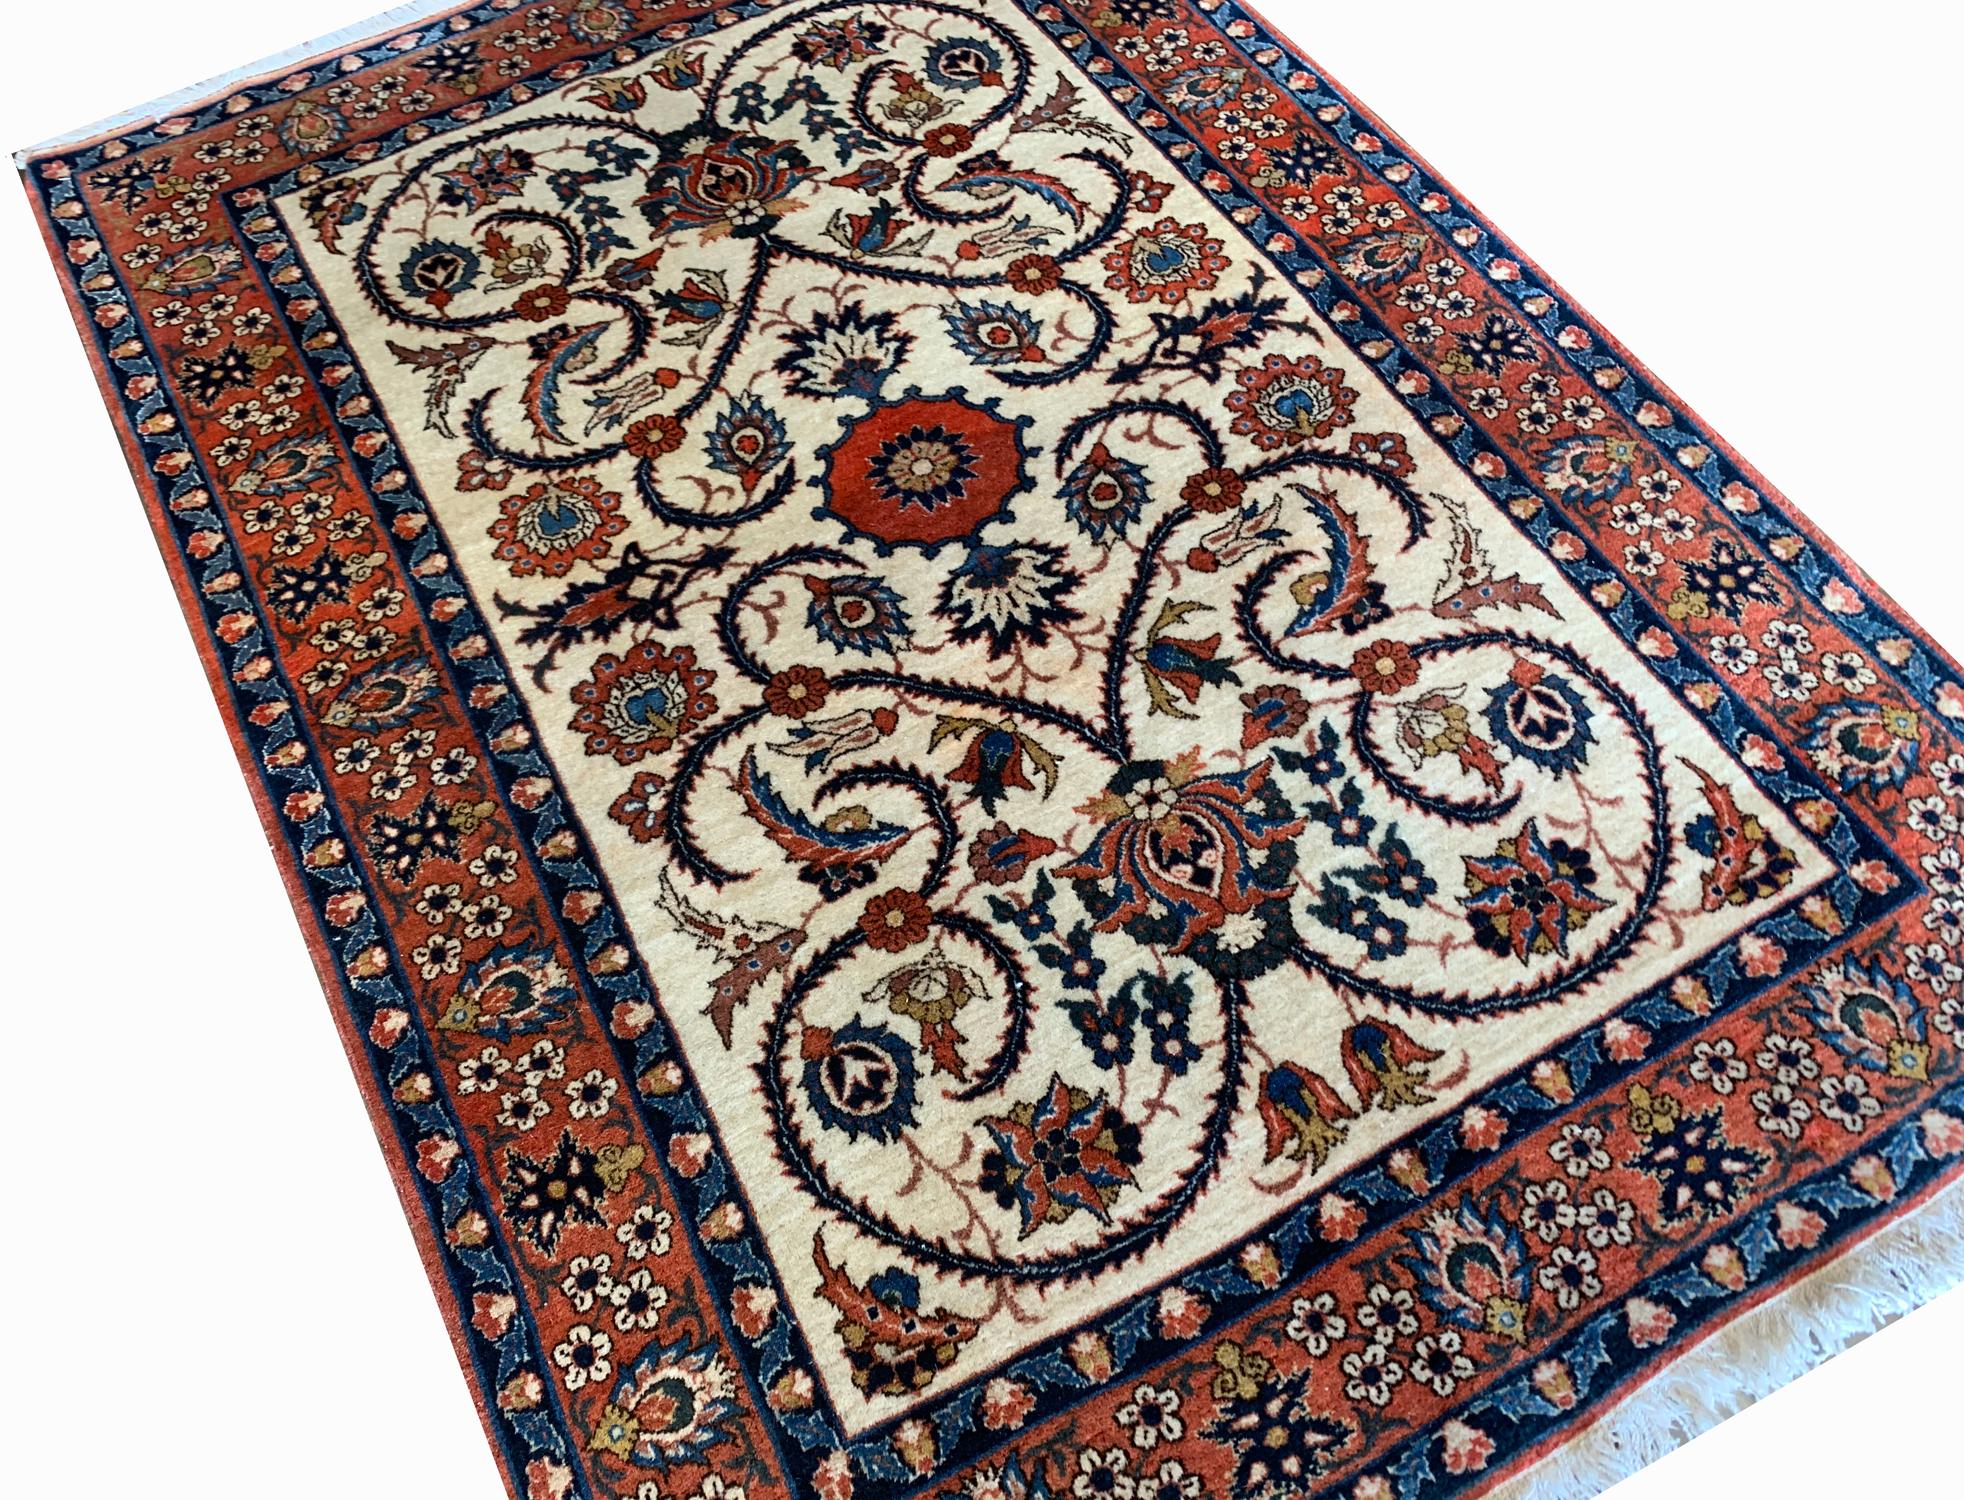 A highly decorative floral design has been woven in blue, rust, beige and brown accents on a subtle cream background. Symmetrically designed with a bold rust background border. The sophistication in the design and weaving makes it the perfect accent